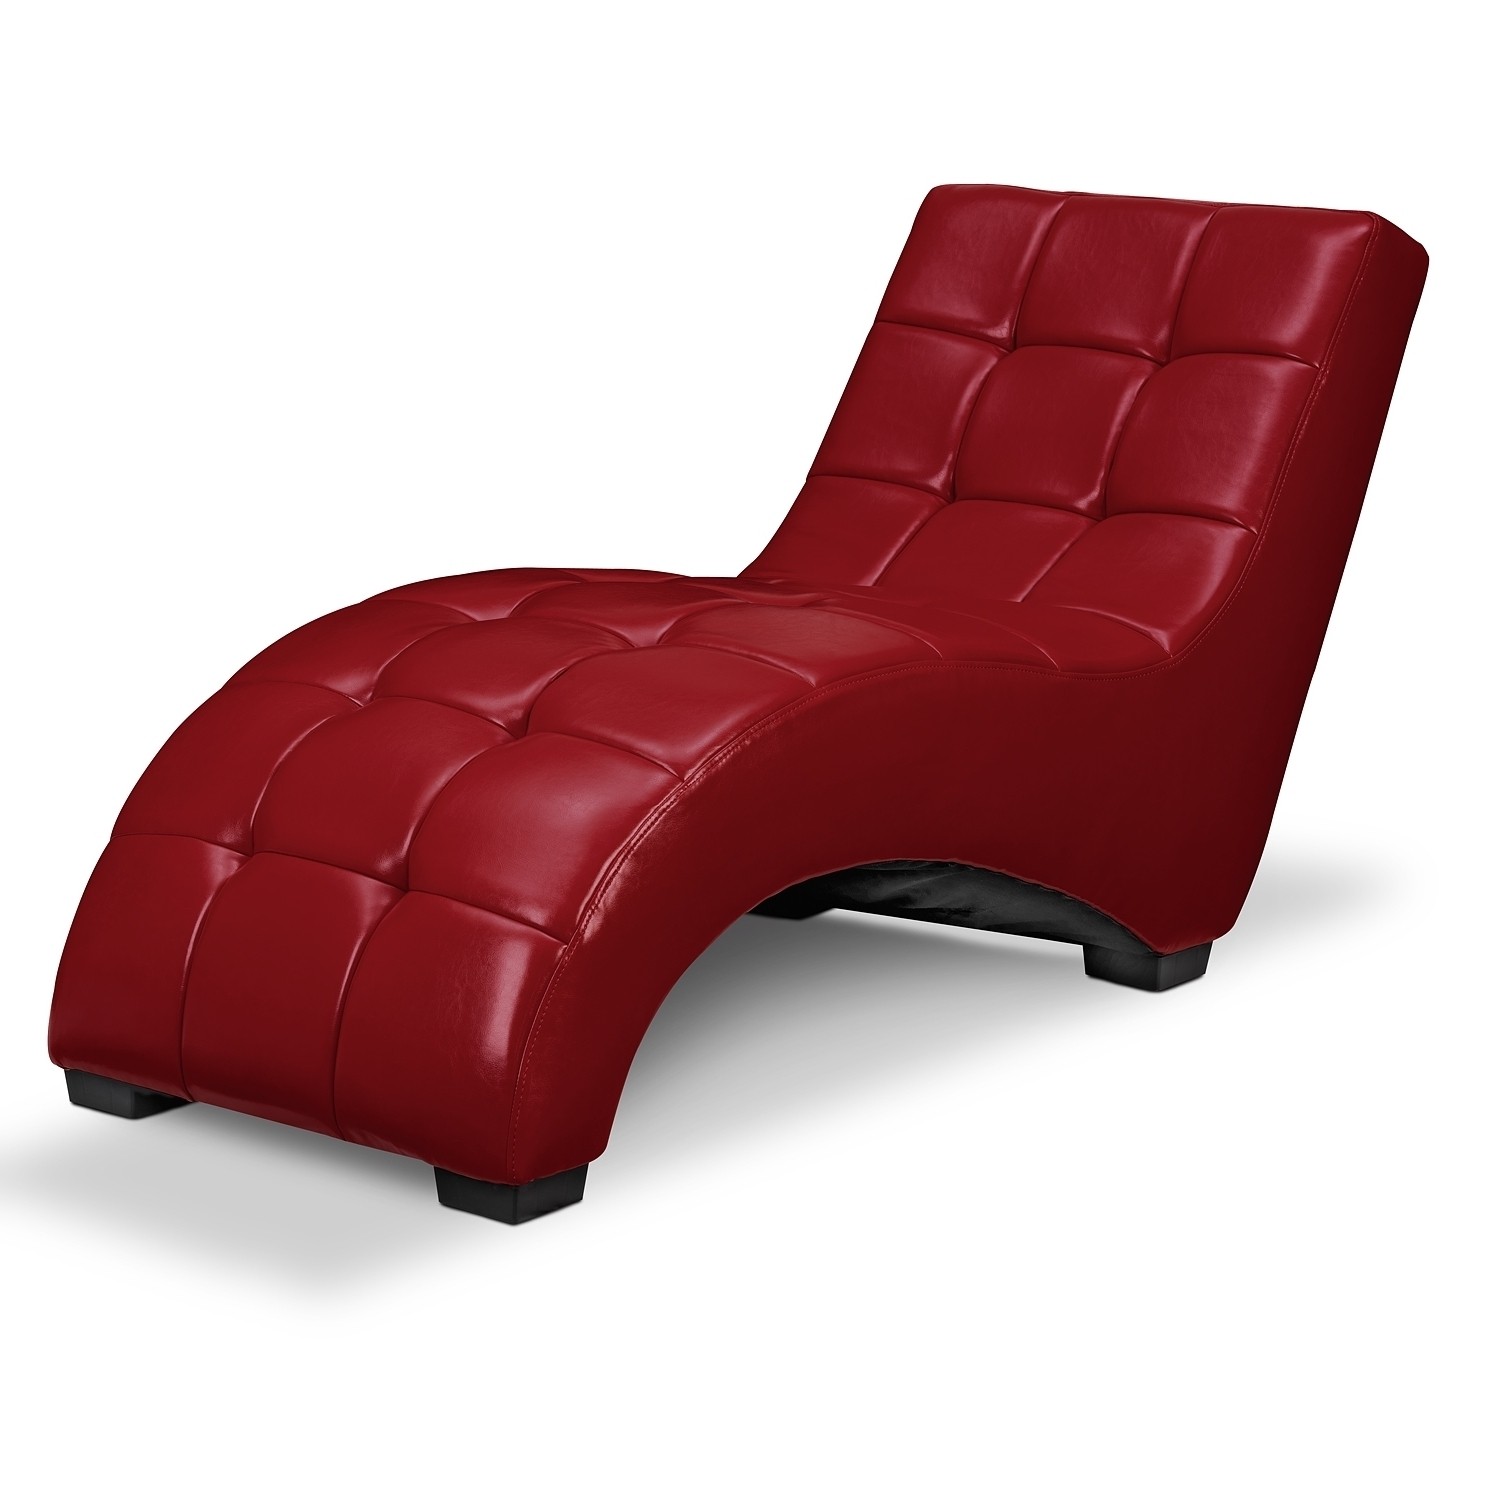 15 best red chaise lounges 2